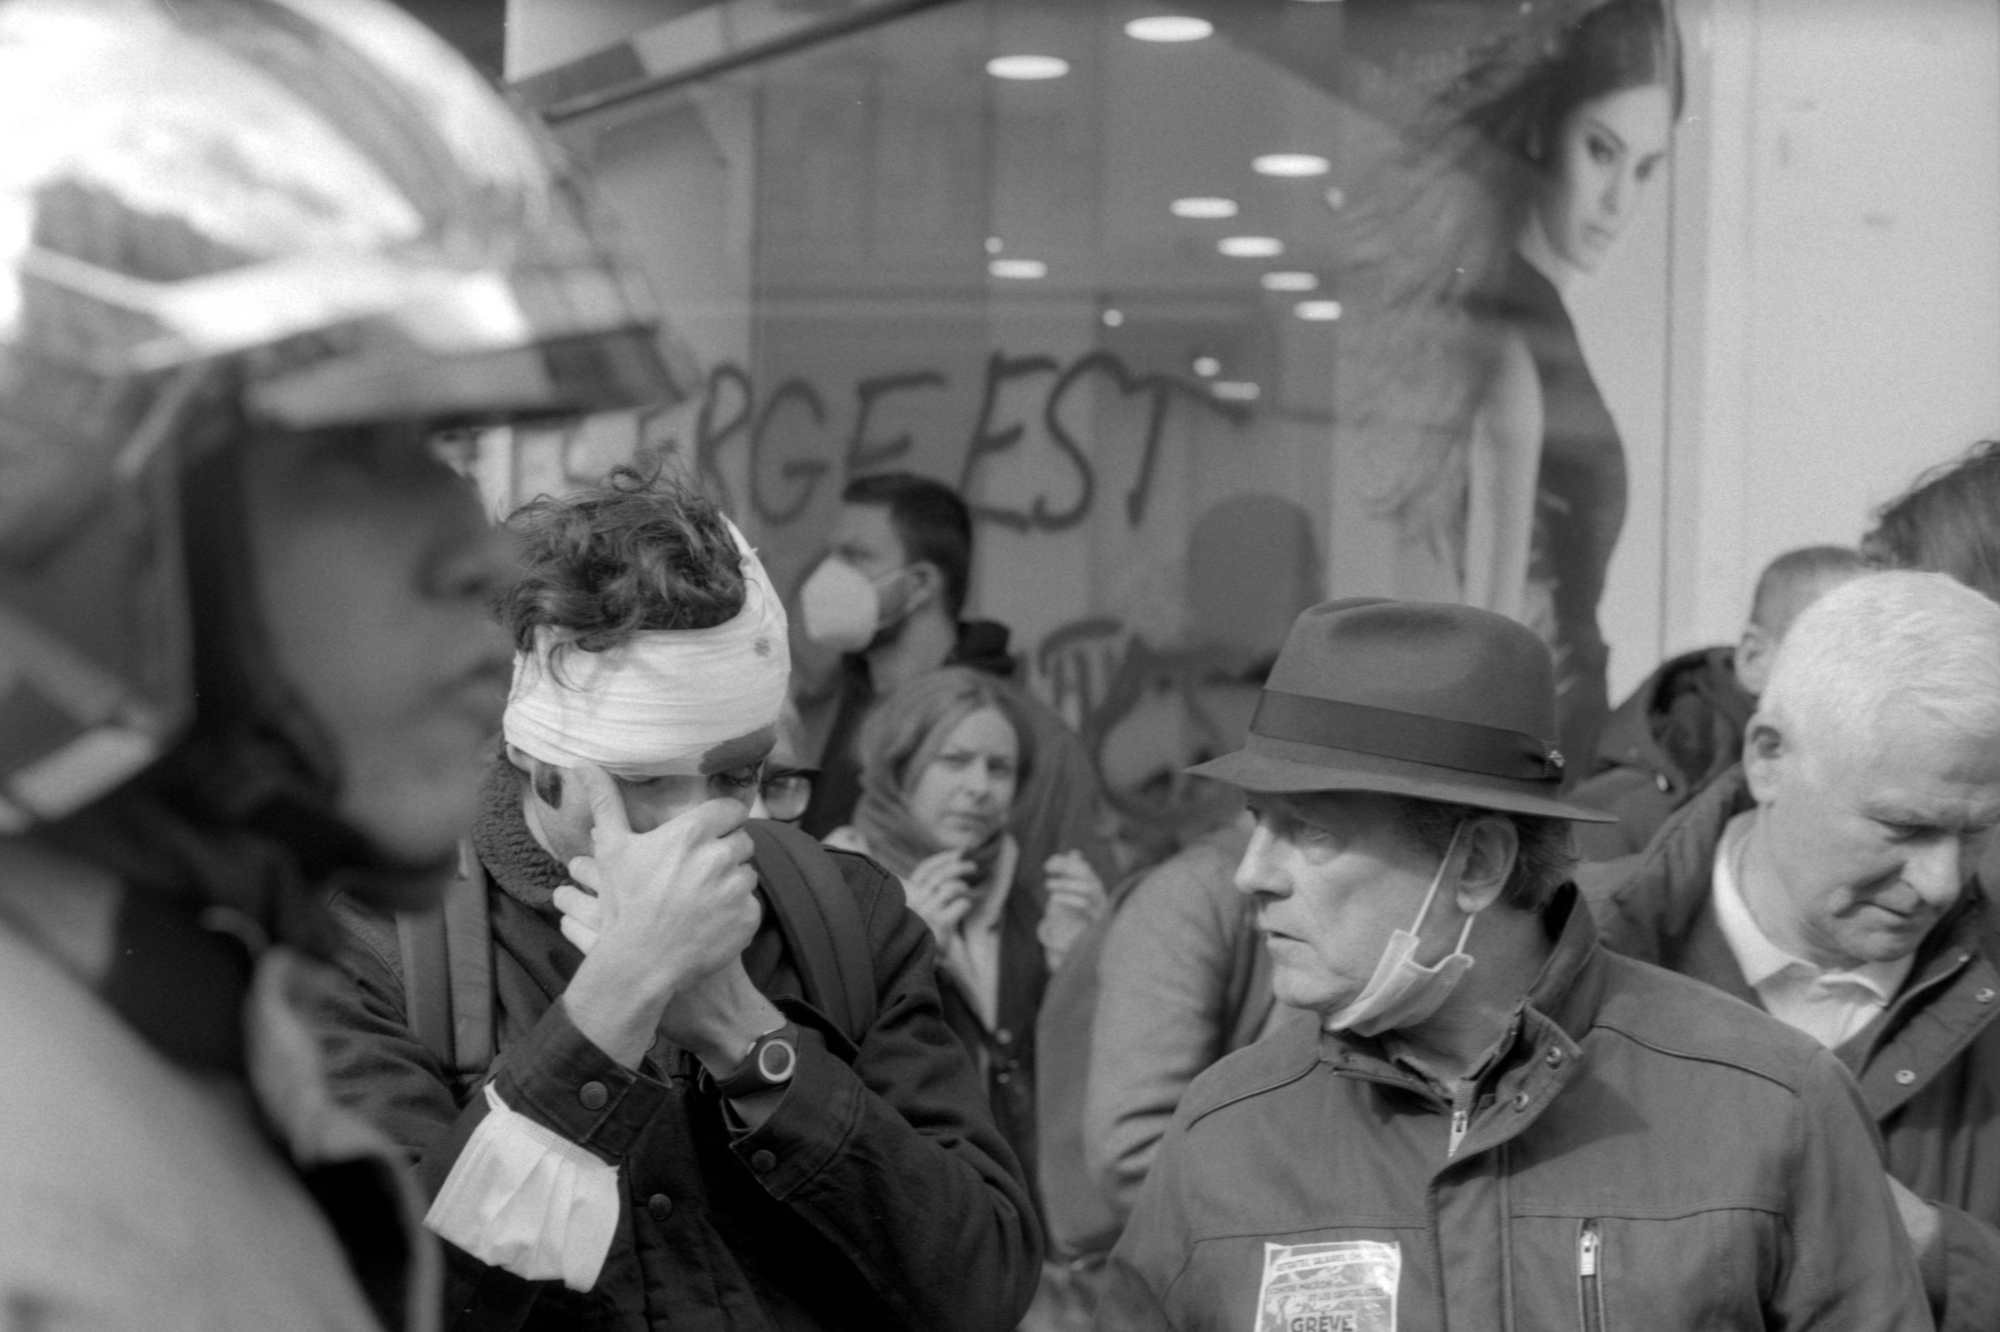 Street photography training: pensions reform protests edition